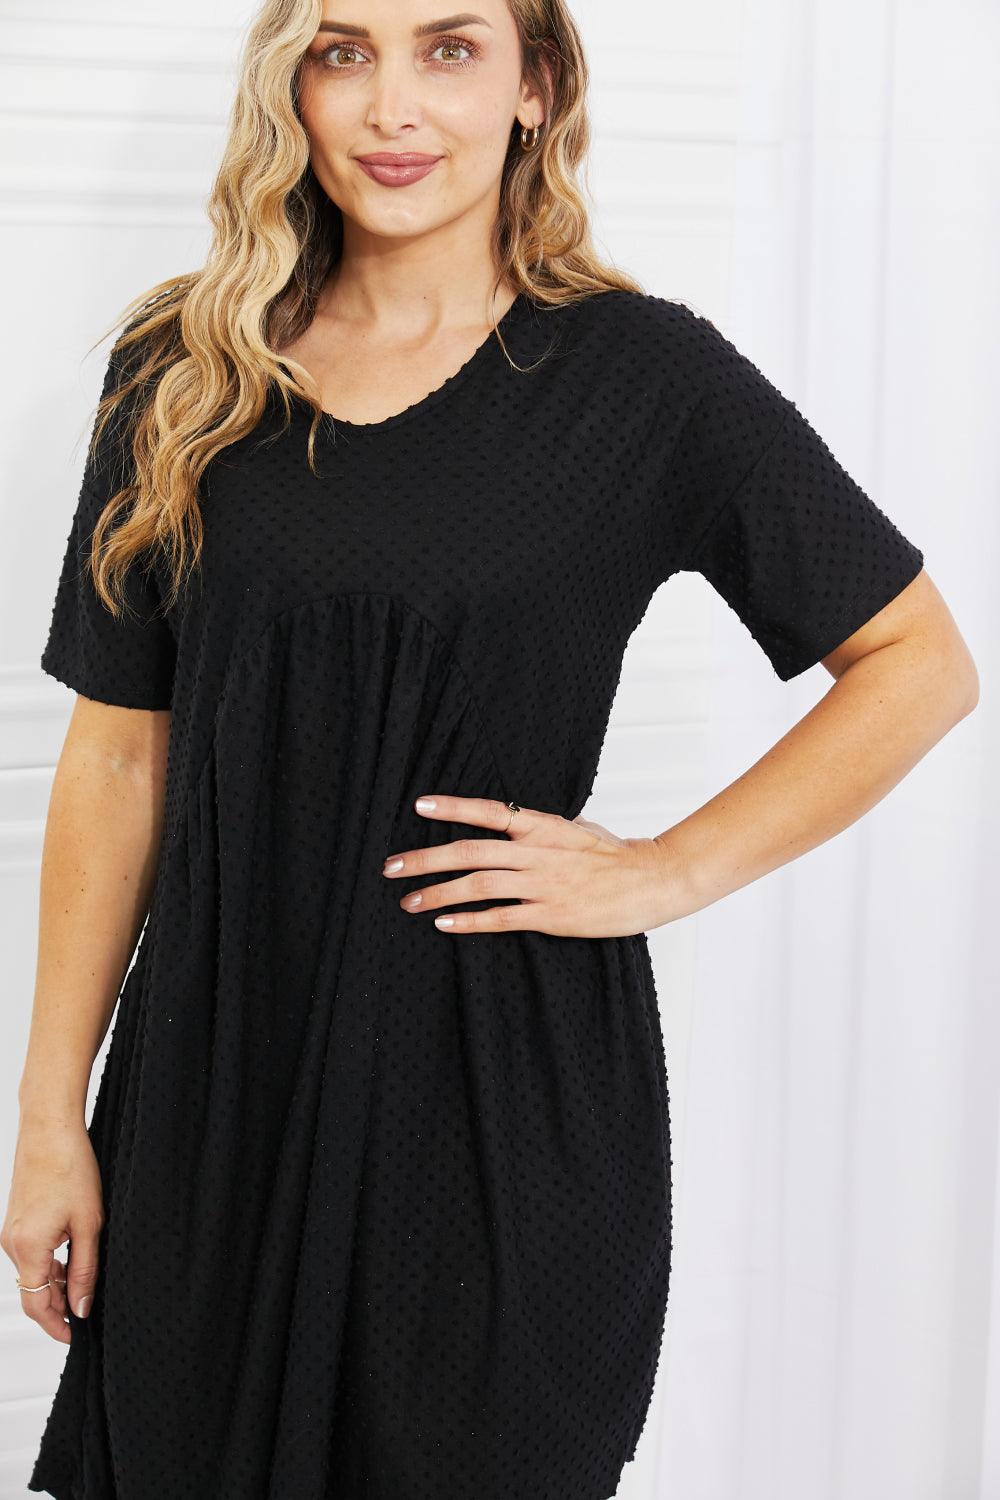 BOMBOM Another Day Swiss Dot Casual Dress in Black - God's Girl Gifts And Apparel